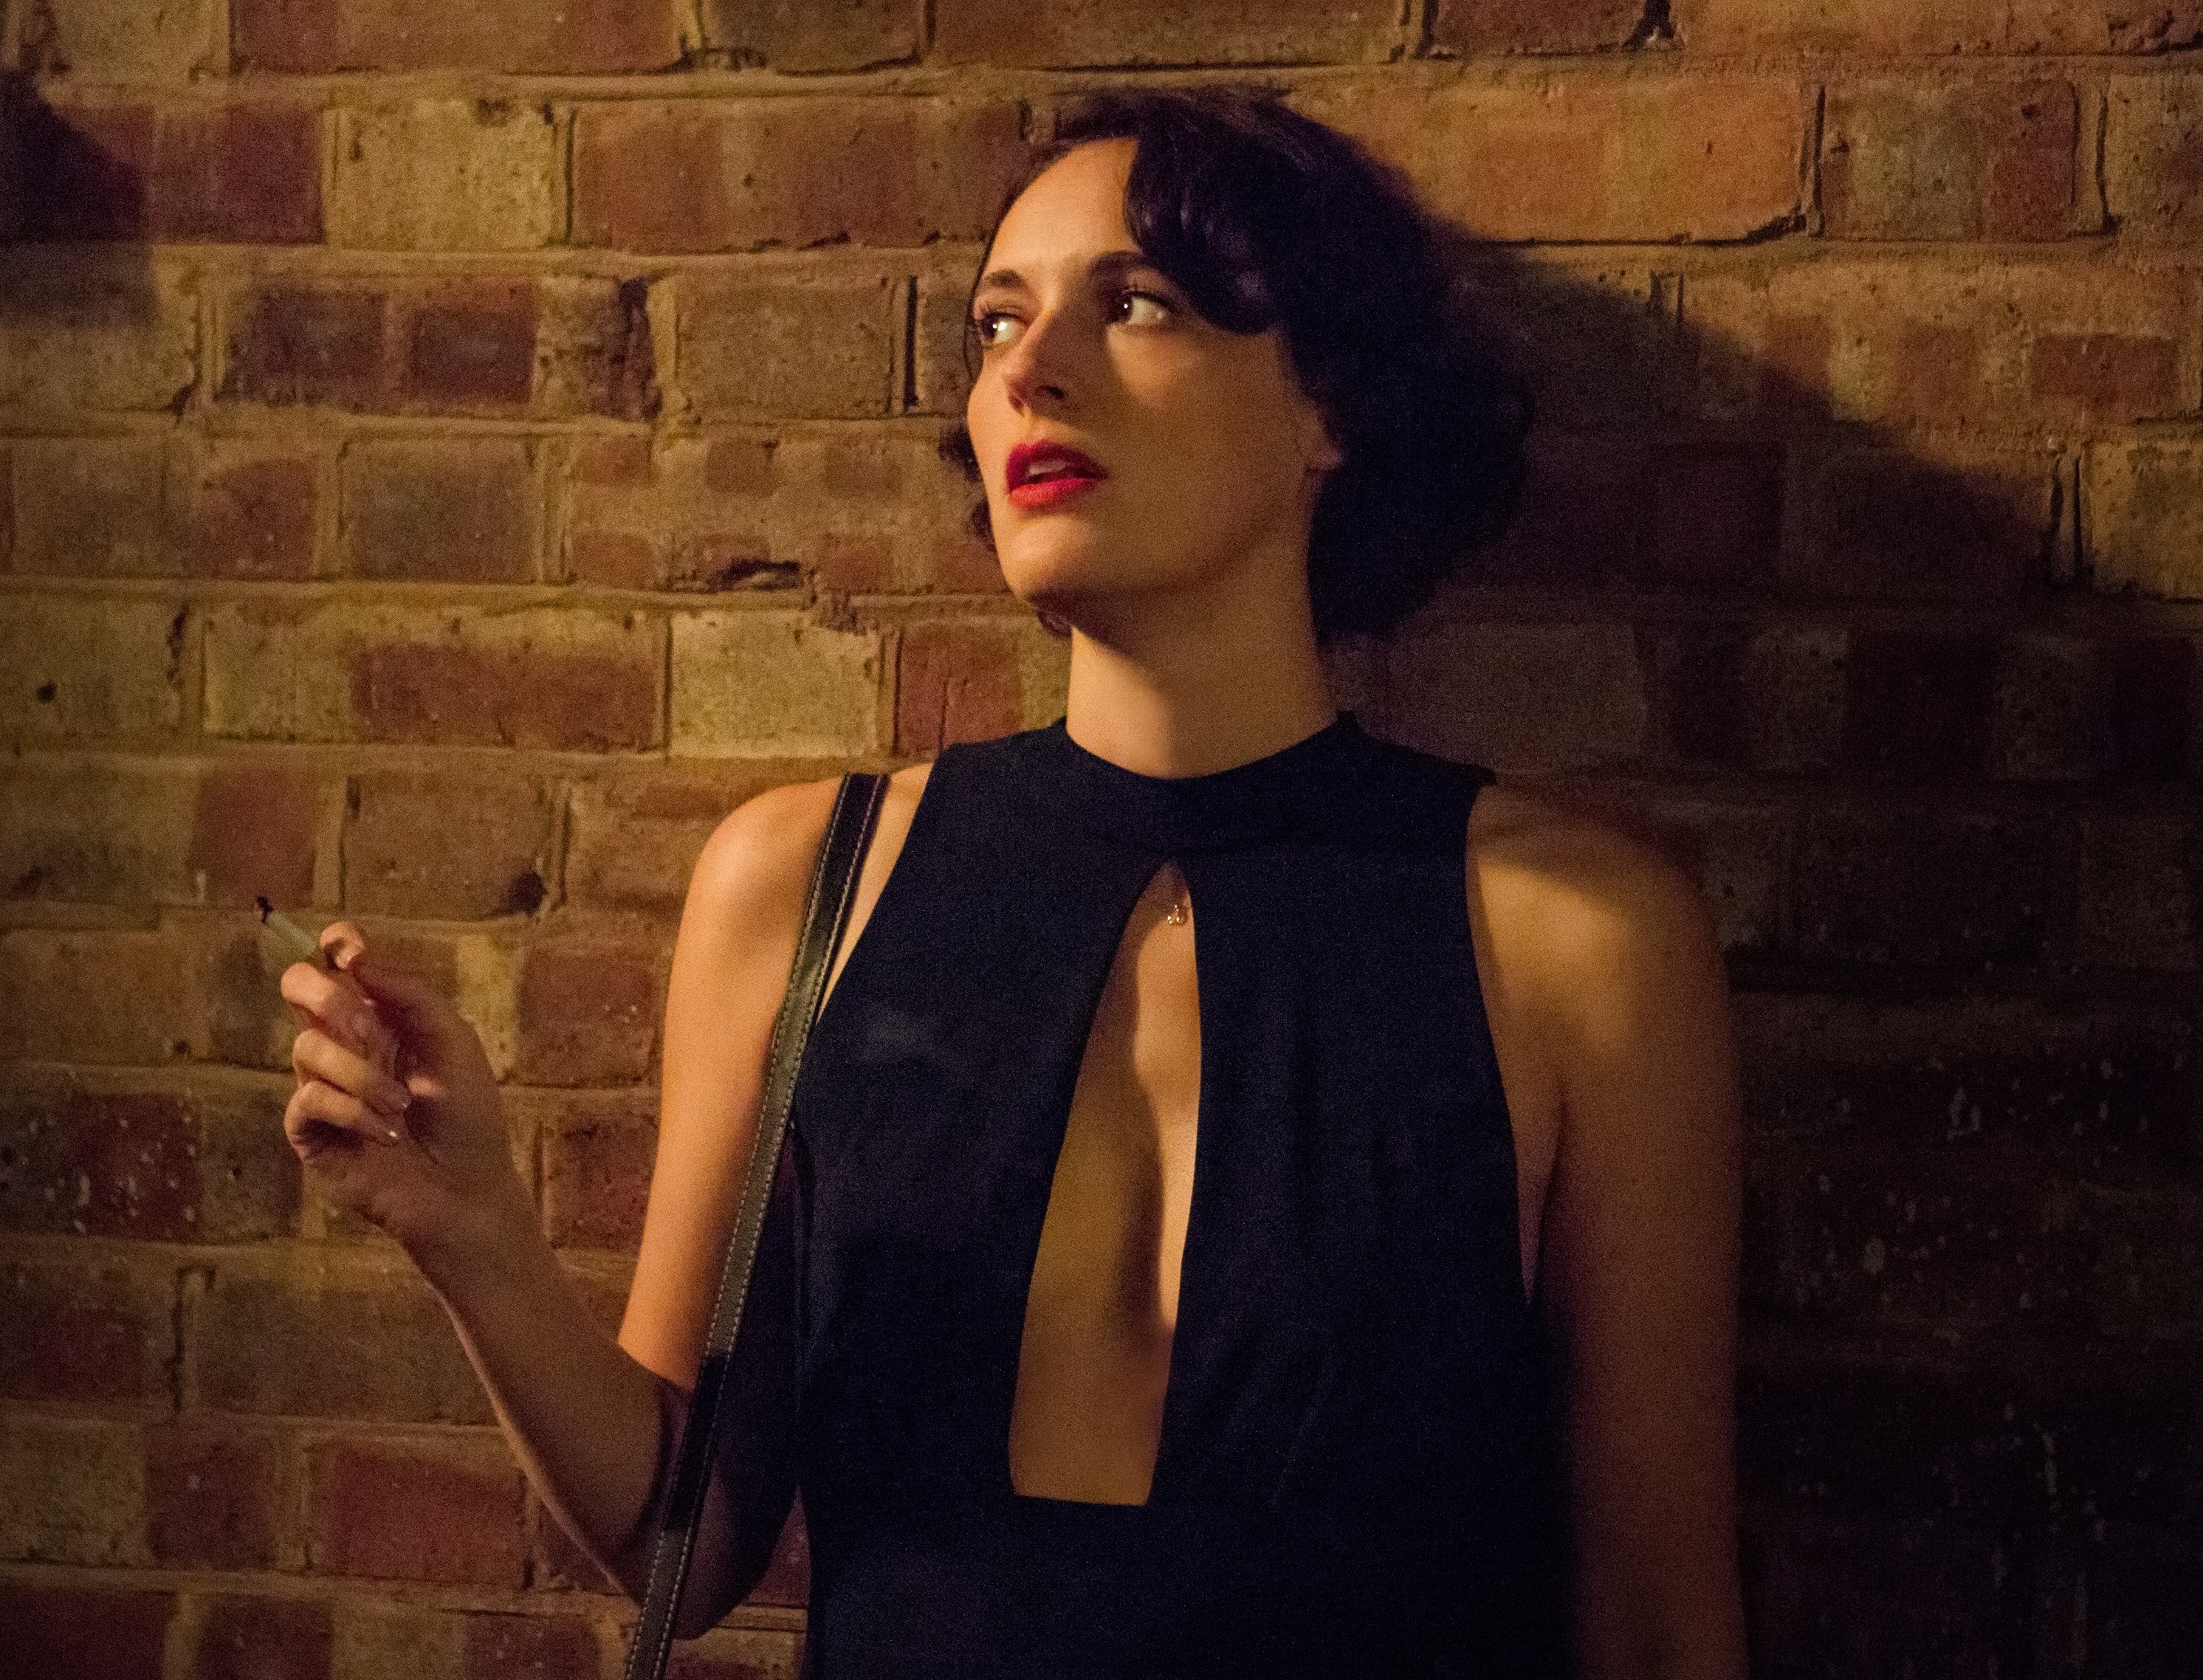 Screenshot from Fleabag, jumpsuit and smoking cigarette